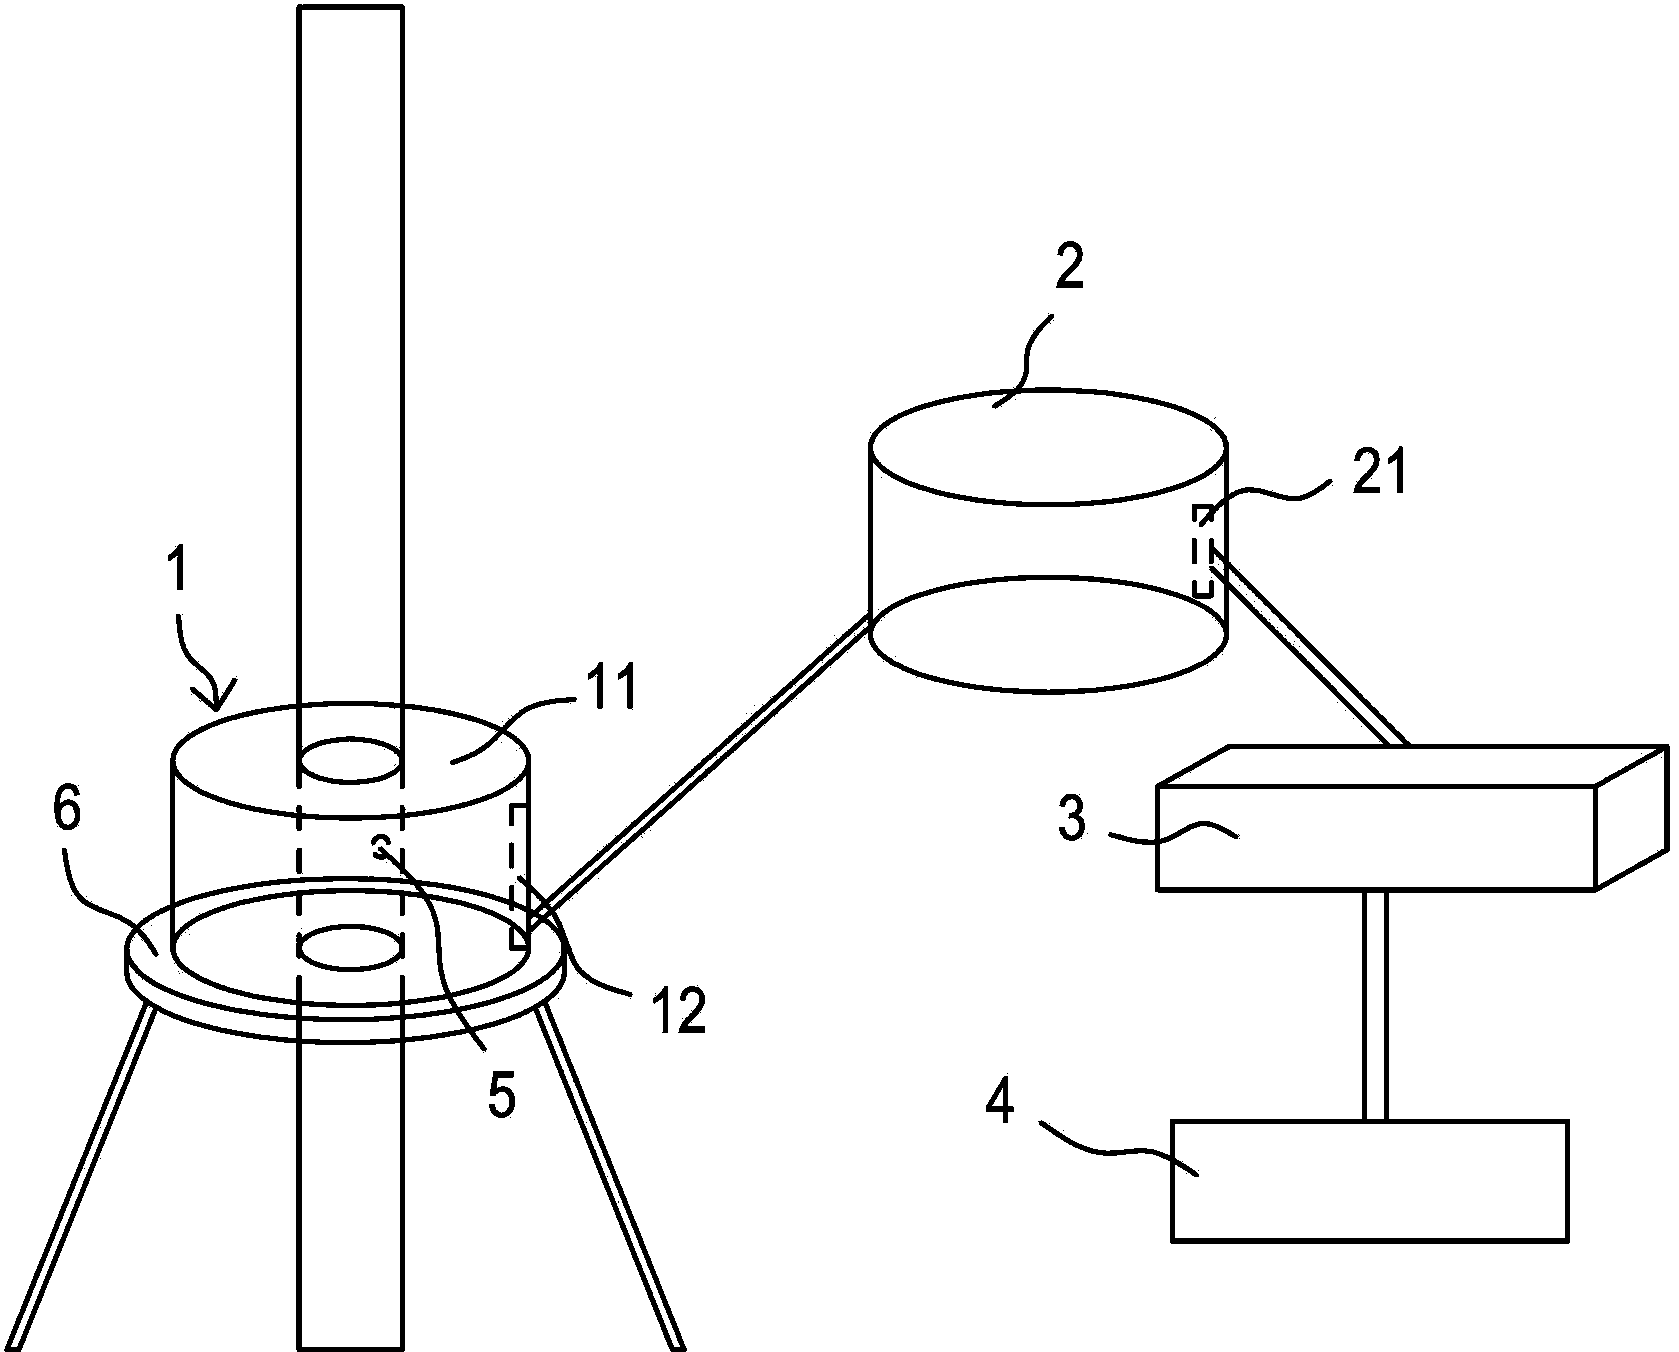 Device for correcting sap flow measurement of trunk xylem